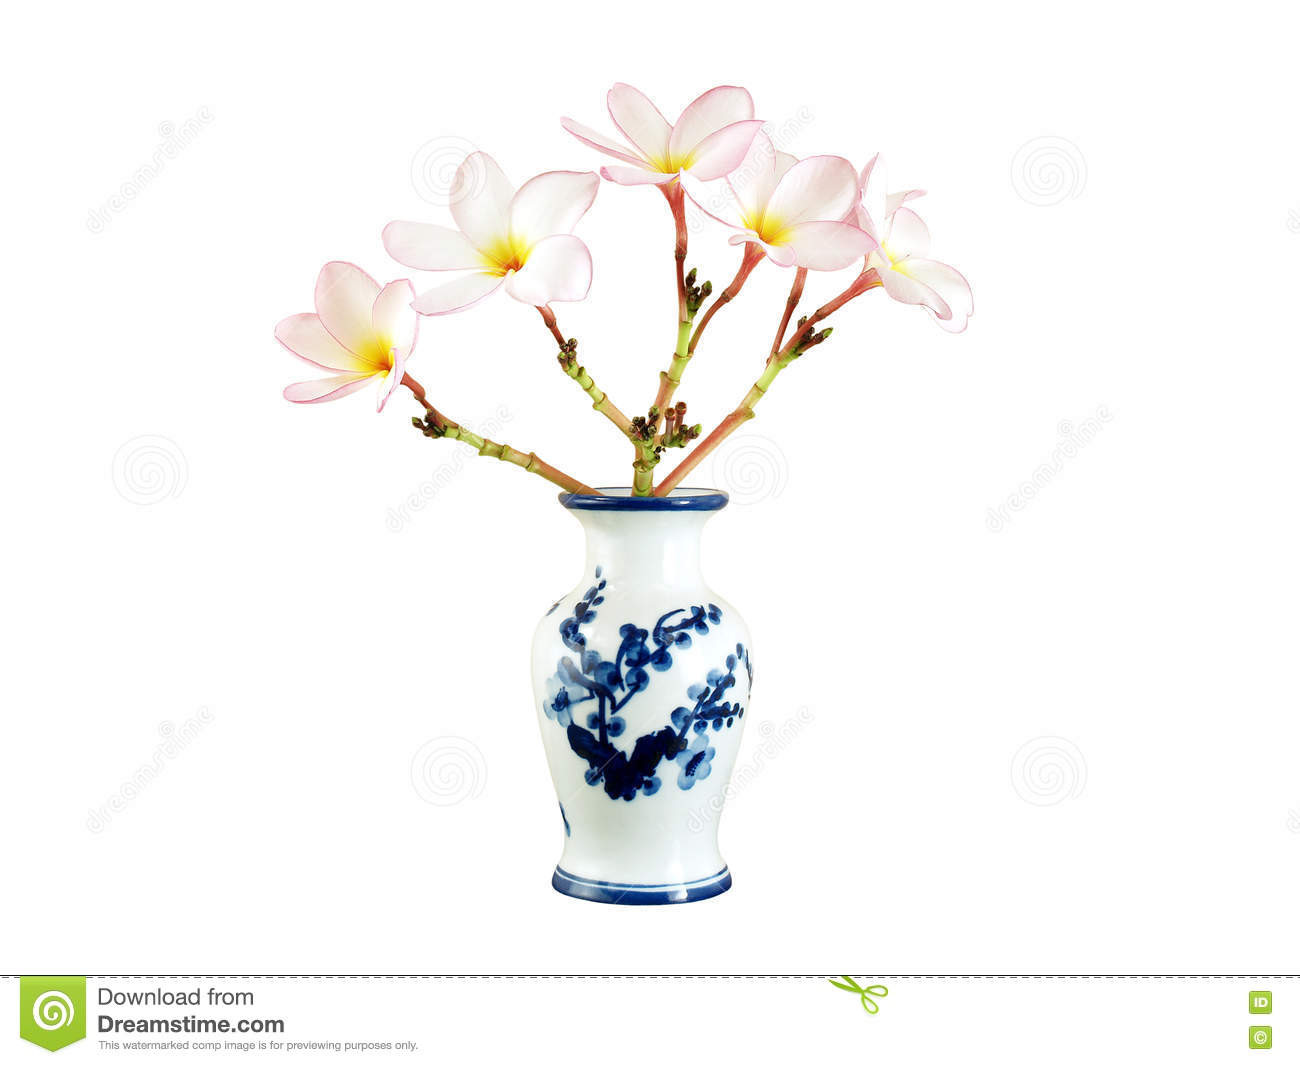 11 attractive Blue and Brown Decorative Vases 2024 free download blue and brown decorative vases of beautiful bouquet light pink plumeria or frangipani in white chinese intended for beautiful bouquet light pink plumeria or frangipani in white chinese vase